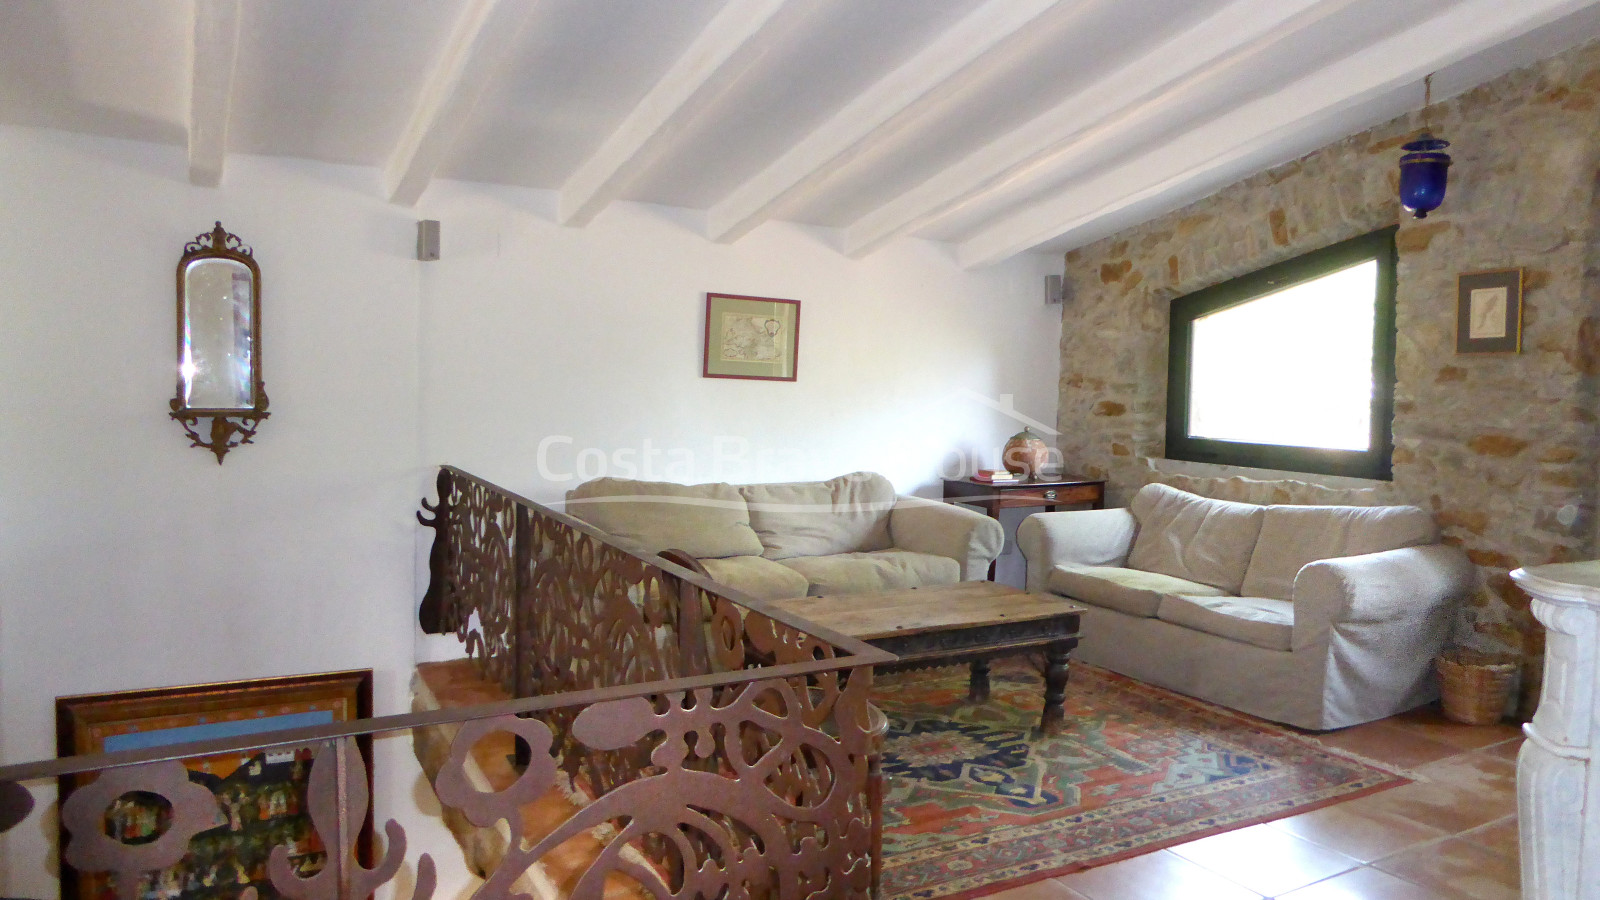 Exclusive finca with two Catalan masias for sale in Sant Martí Vell